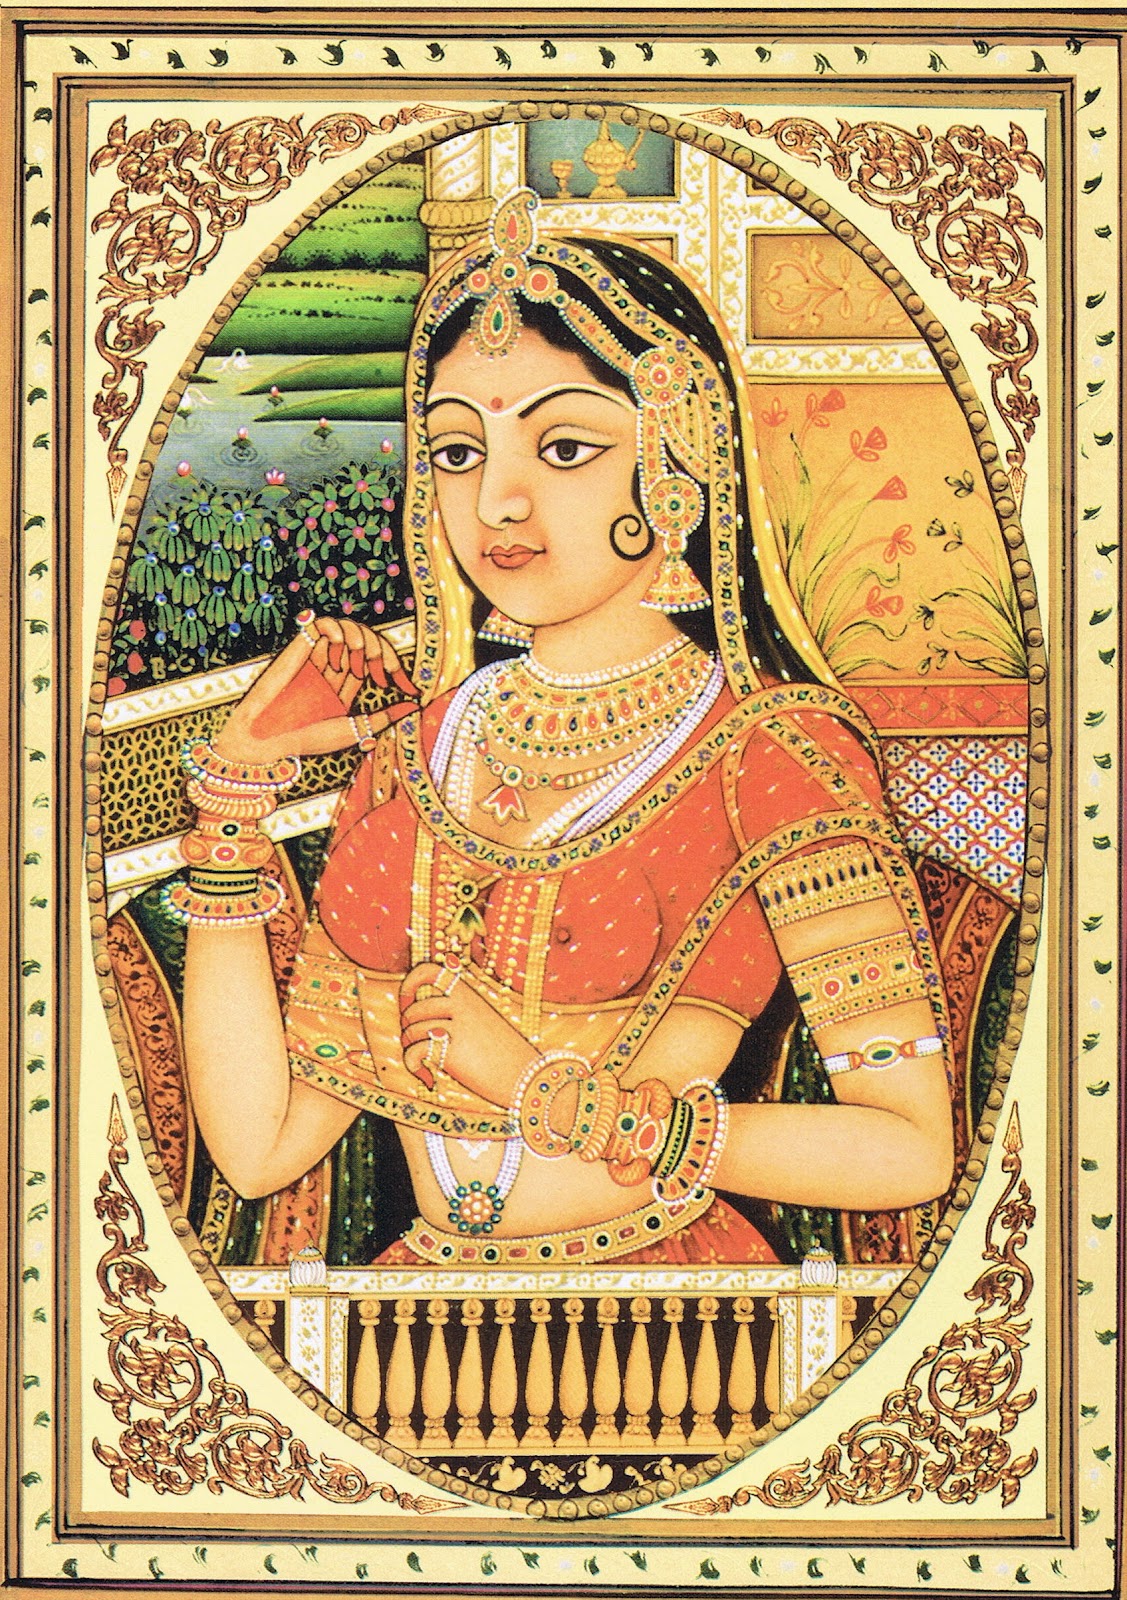 ... Rajasthani Paintings Portraits Photos Quality Wallpapers Image gallery